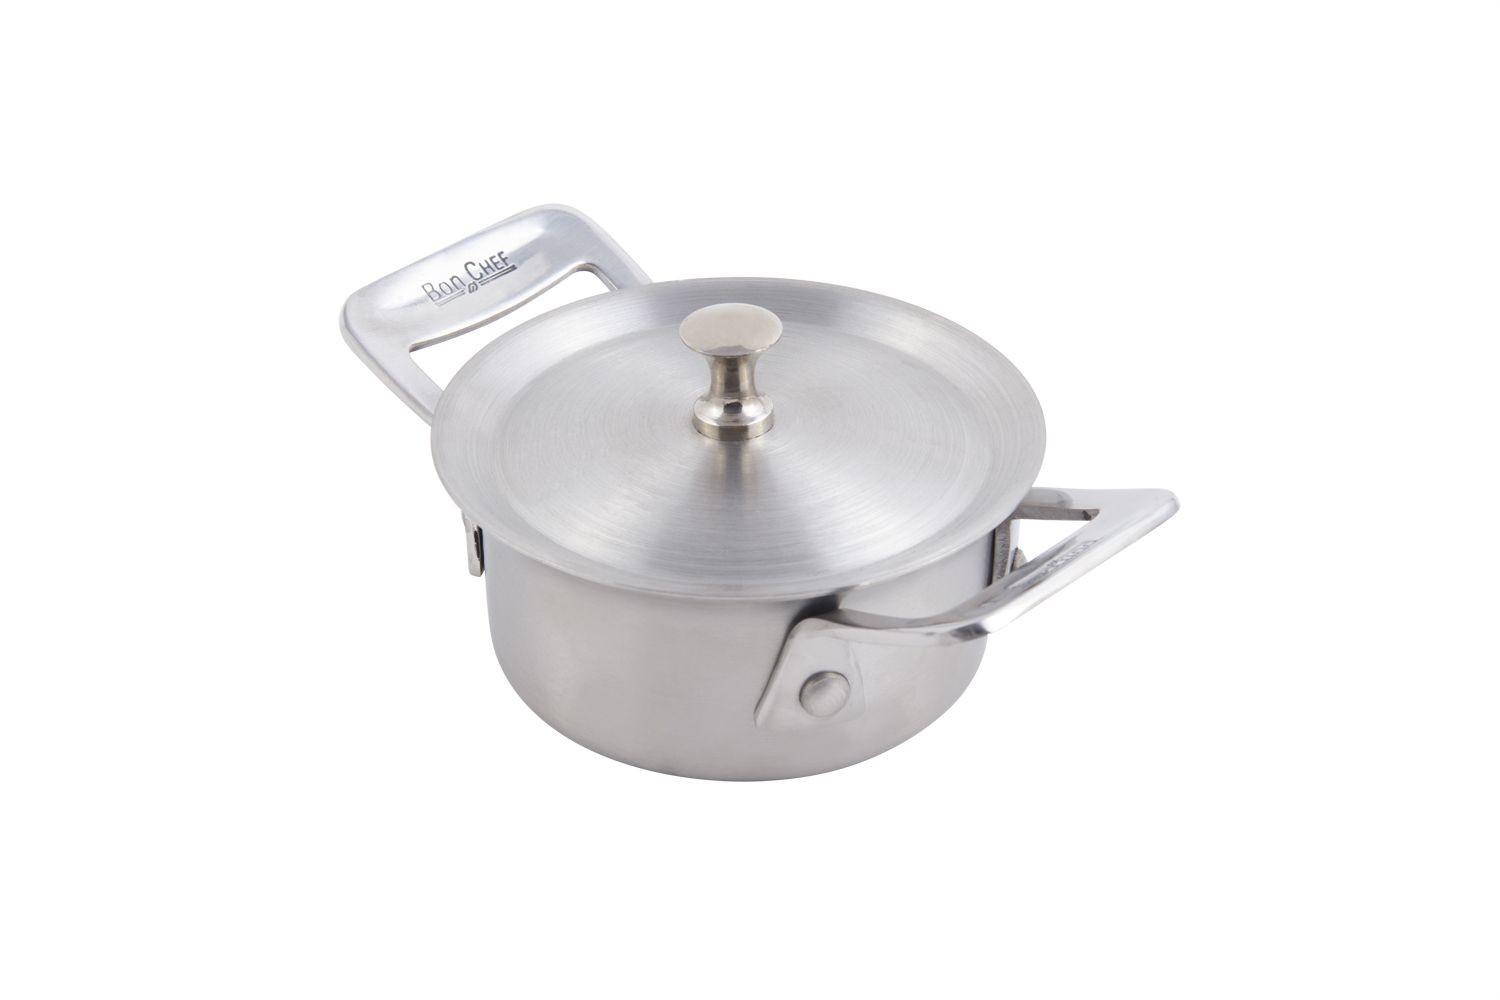 Bon Chef 60026 Cucina Stainless Steel Round Dish with Lid, 8 oz.